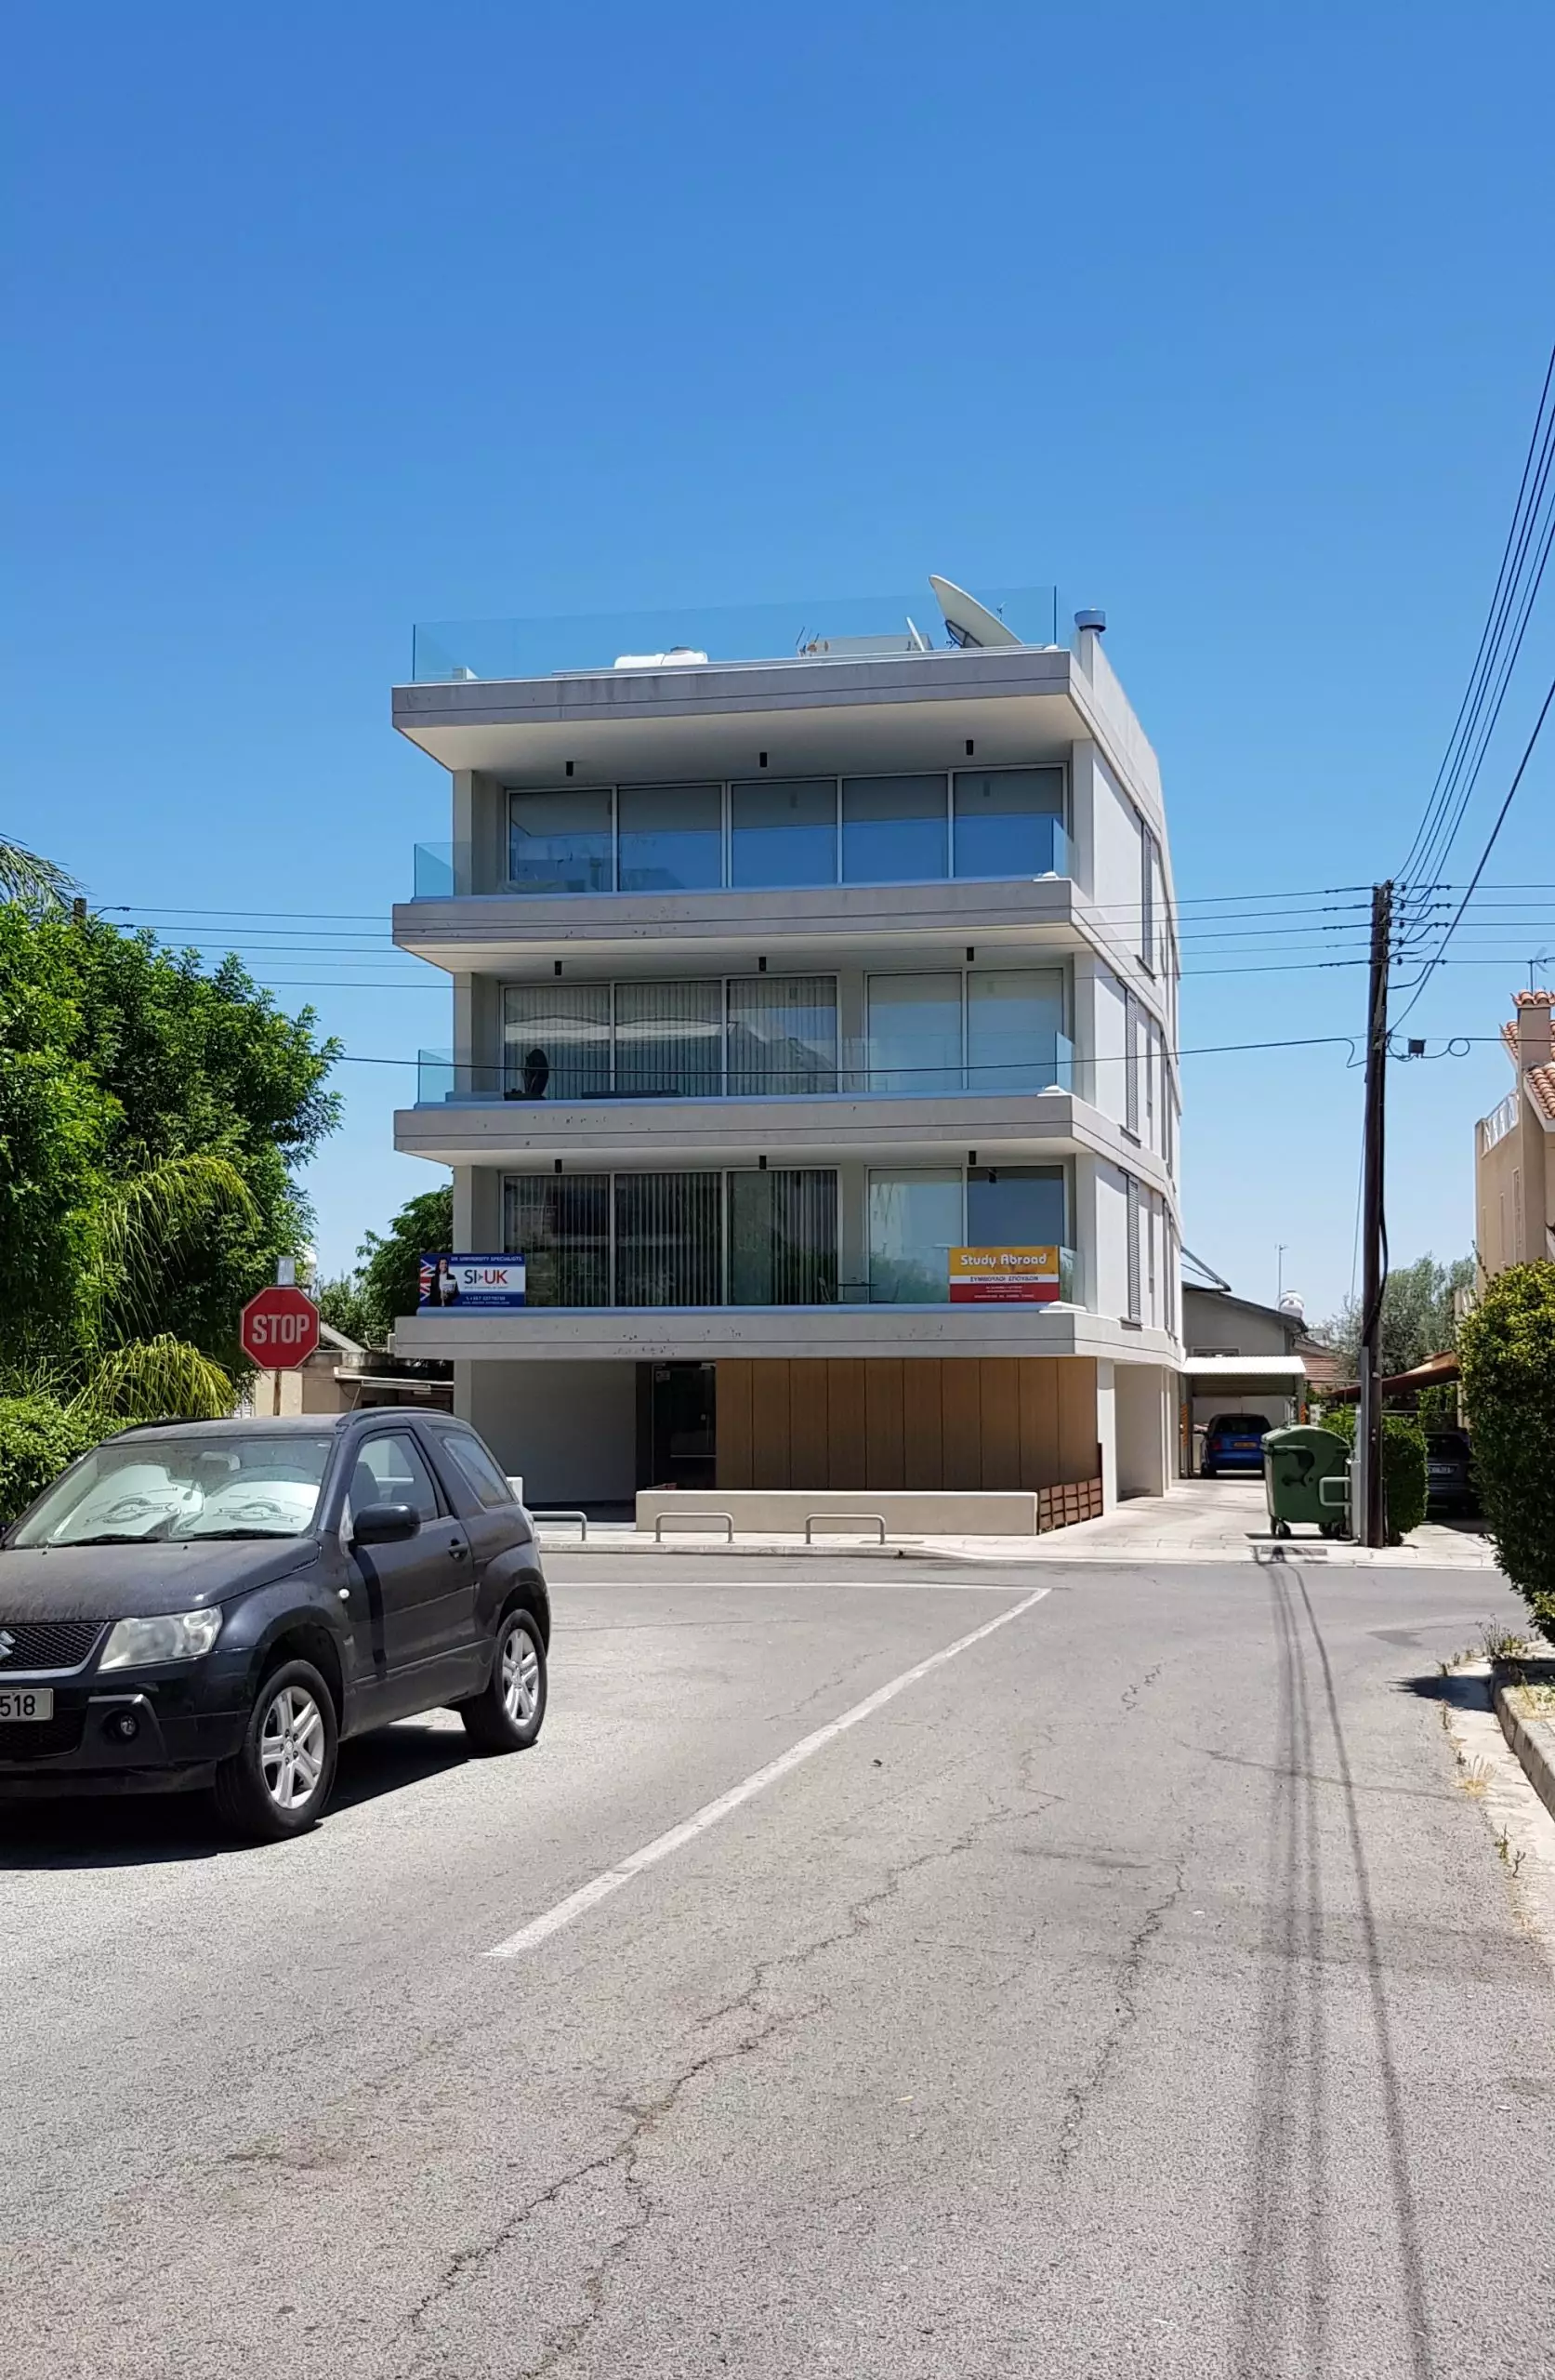 Building for sale in Cyprus + relocation cash for buyer